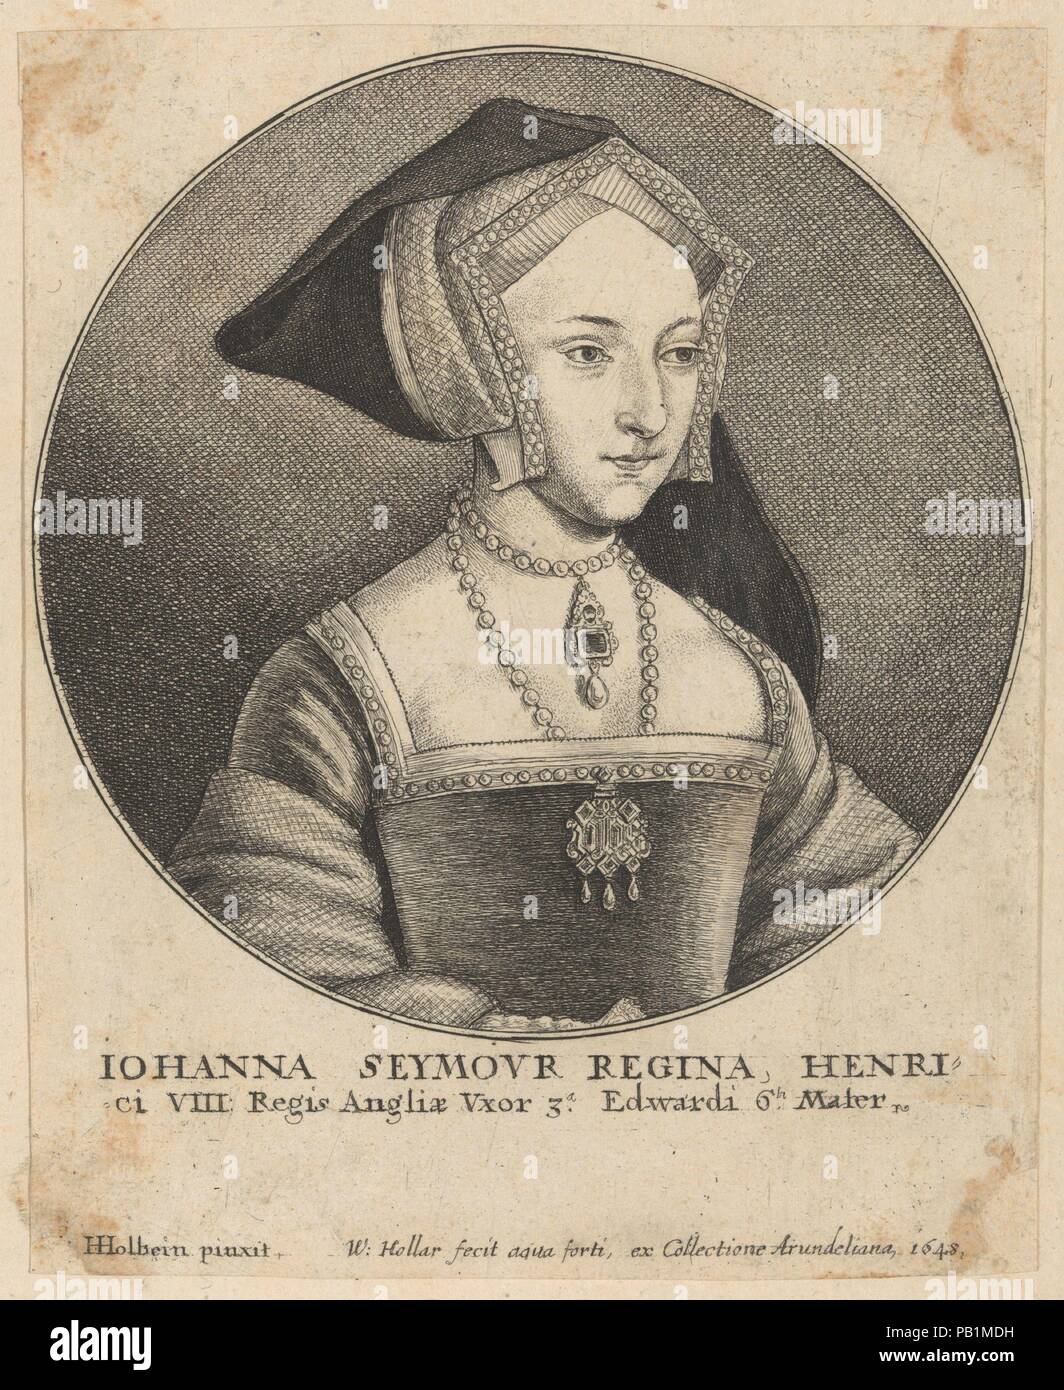 Iohanna Seymovr Regina Henri. Artist: After Hans Holbein the Younger (German, Augsburg 1497/98-1543 London). Dimensions: sheet: 5 3/16 x 4 1/4 in. (13.2 x 10.8 cm). Etcher: Wenceslaus Hollar (Bohemian, Prague 1607-1677 London). Sitter: Jane Seymour (British, 1508/09-1547). Date: 1648.  Portrait of Jane Seymour; half length, to the right; wearing four-sided peaked bonnet with black veil, and low square-cut bodice bordered with pearls and a large jewel, pearls around her neck from which hangs another jewel with pendant pearl; in on oval; after Holbein. Museum: Metropolitan Museum of Art, New Yor Stock Photo